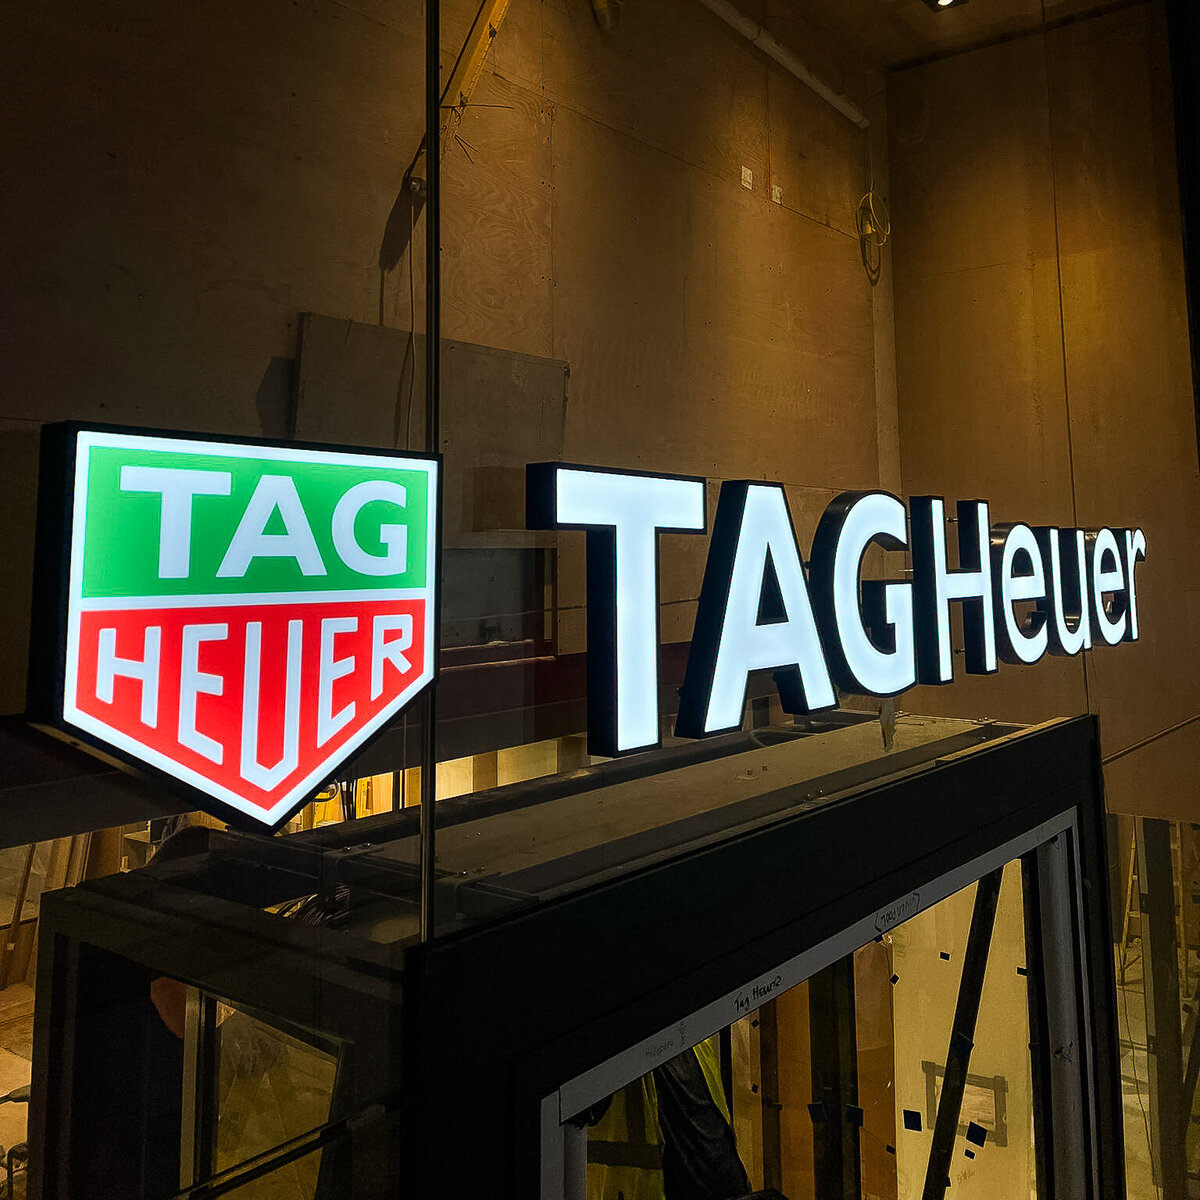 ellis-signs-external-signage-for-tagheuer-liverpool-one